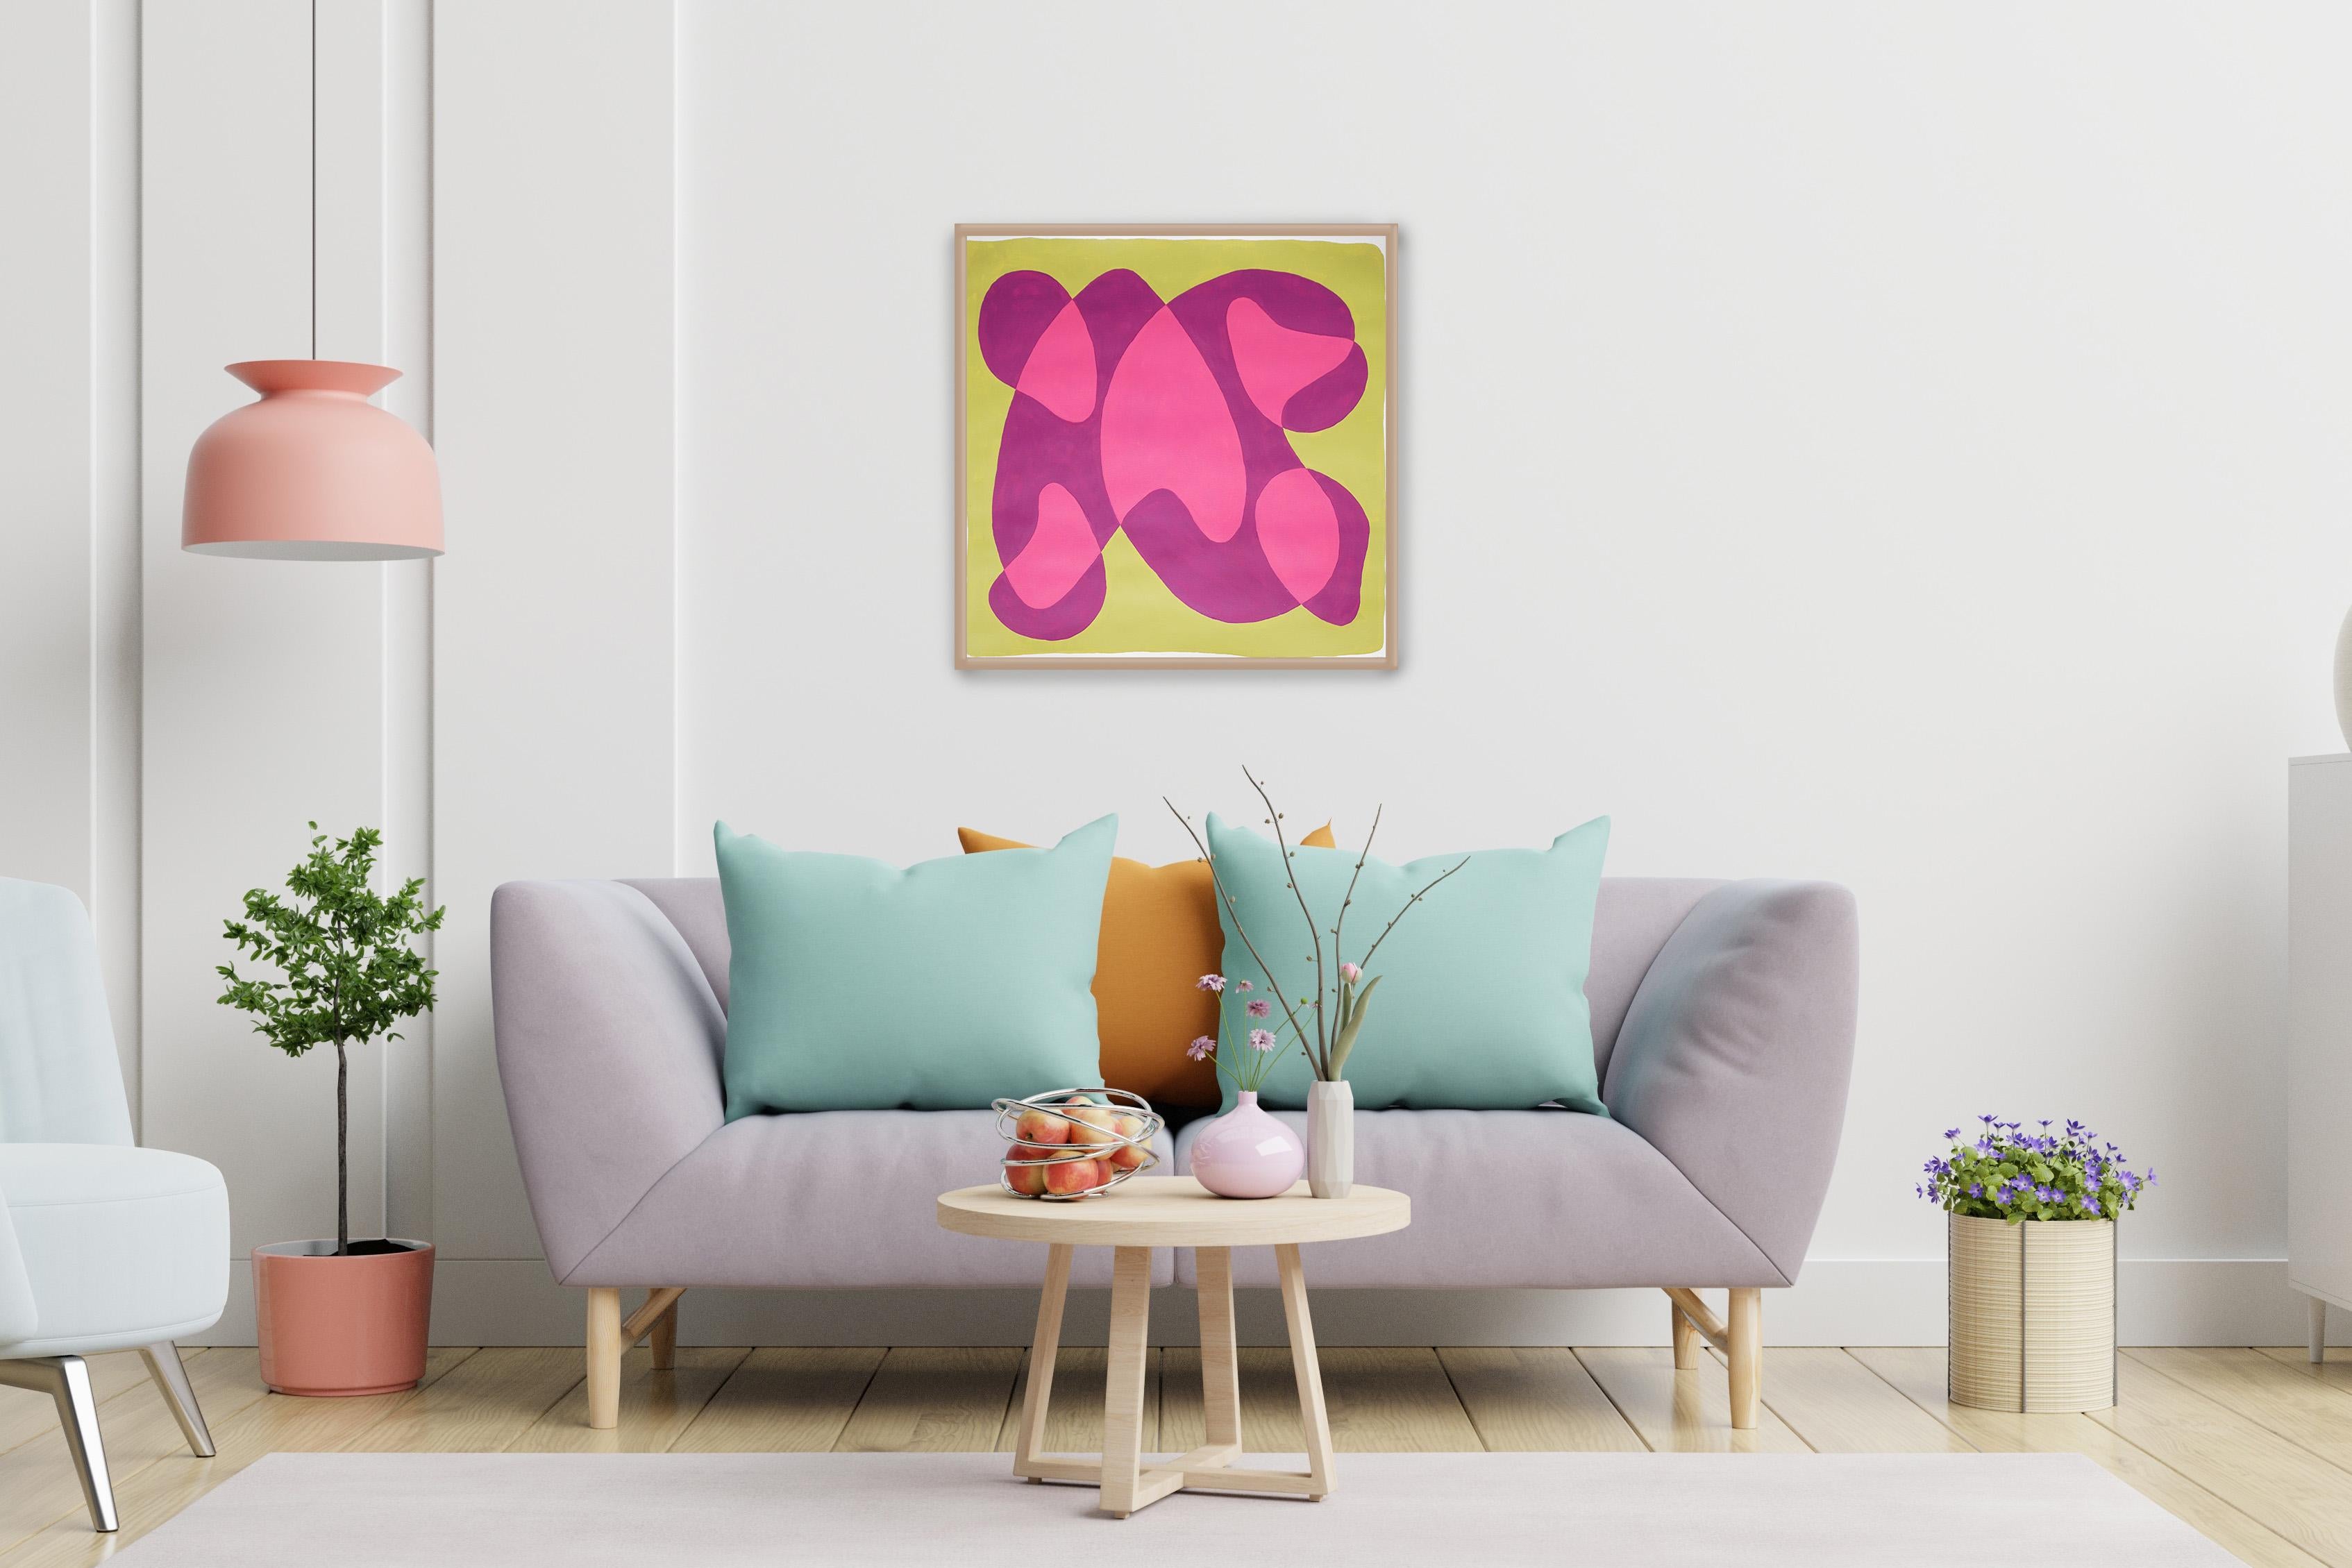 Modernist Garden, Pink and Green Complementary Tones, Organic Shapes Shades - Painting by Ryan Rivadeneyra